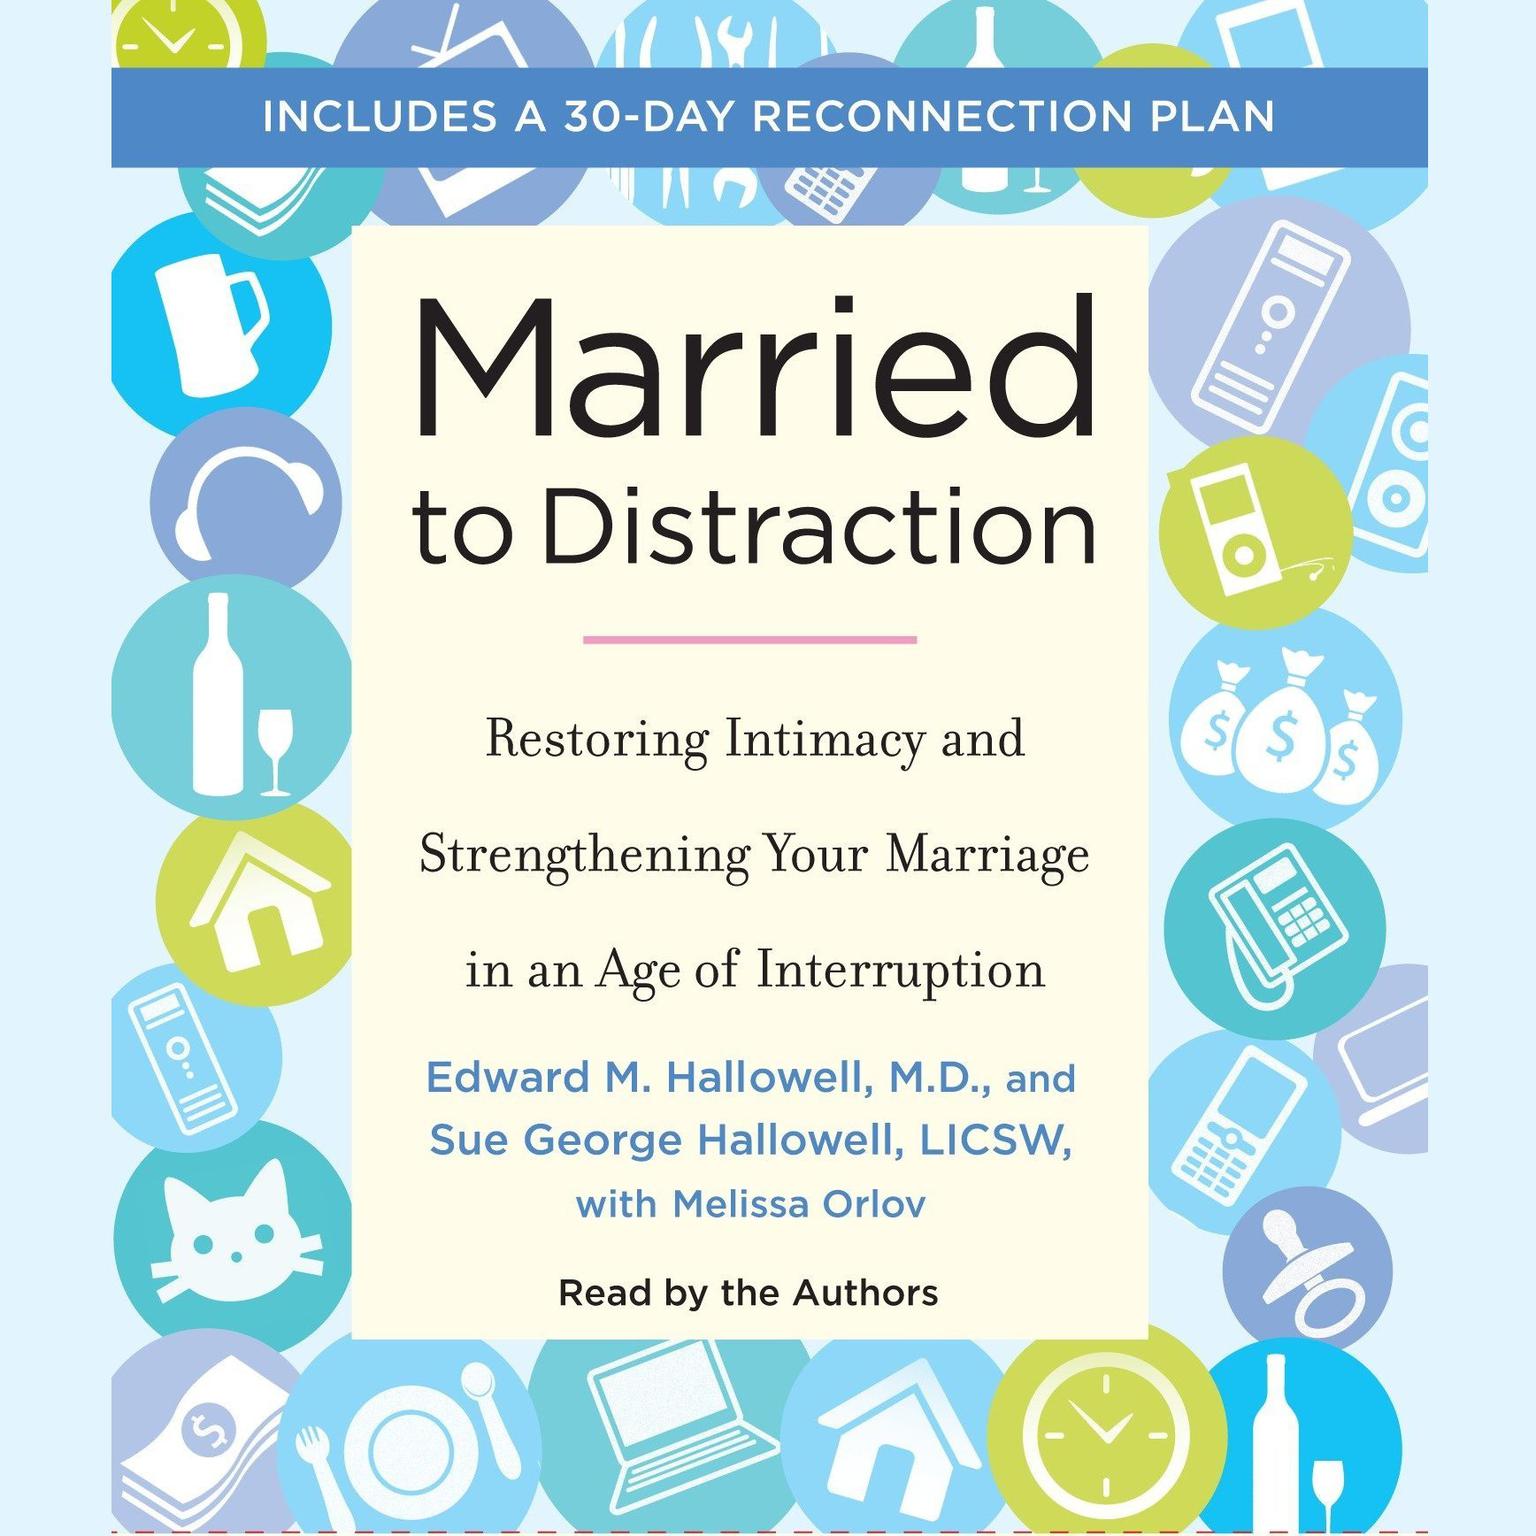 Married to Distraction (Abridged): Restoring Intimacy and Strengthening Your Marriage in an Age of Interruption Audiobook, by Edward M. Hallowell